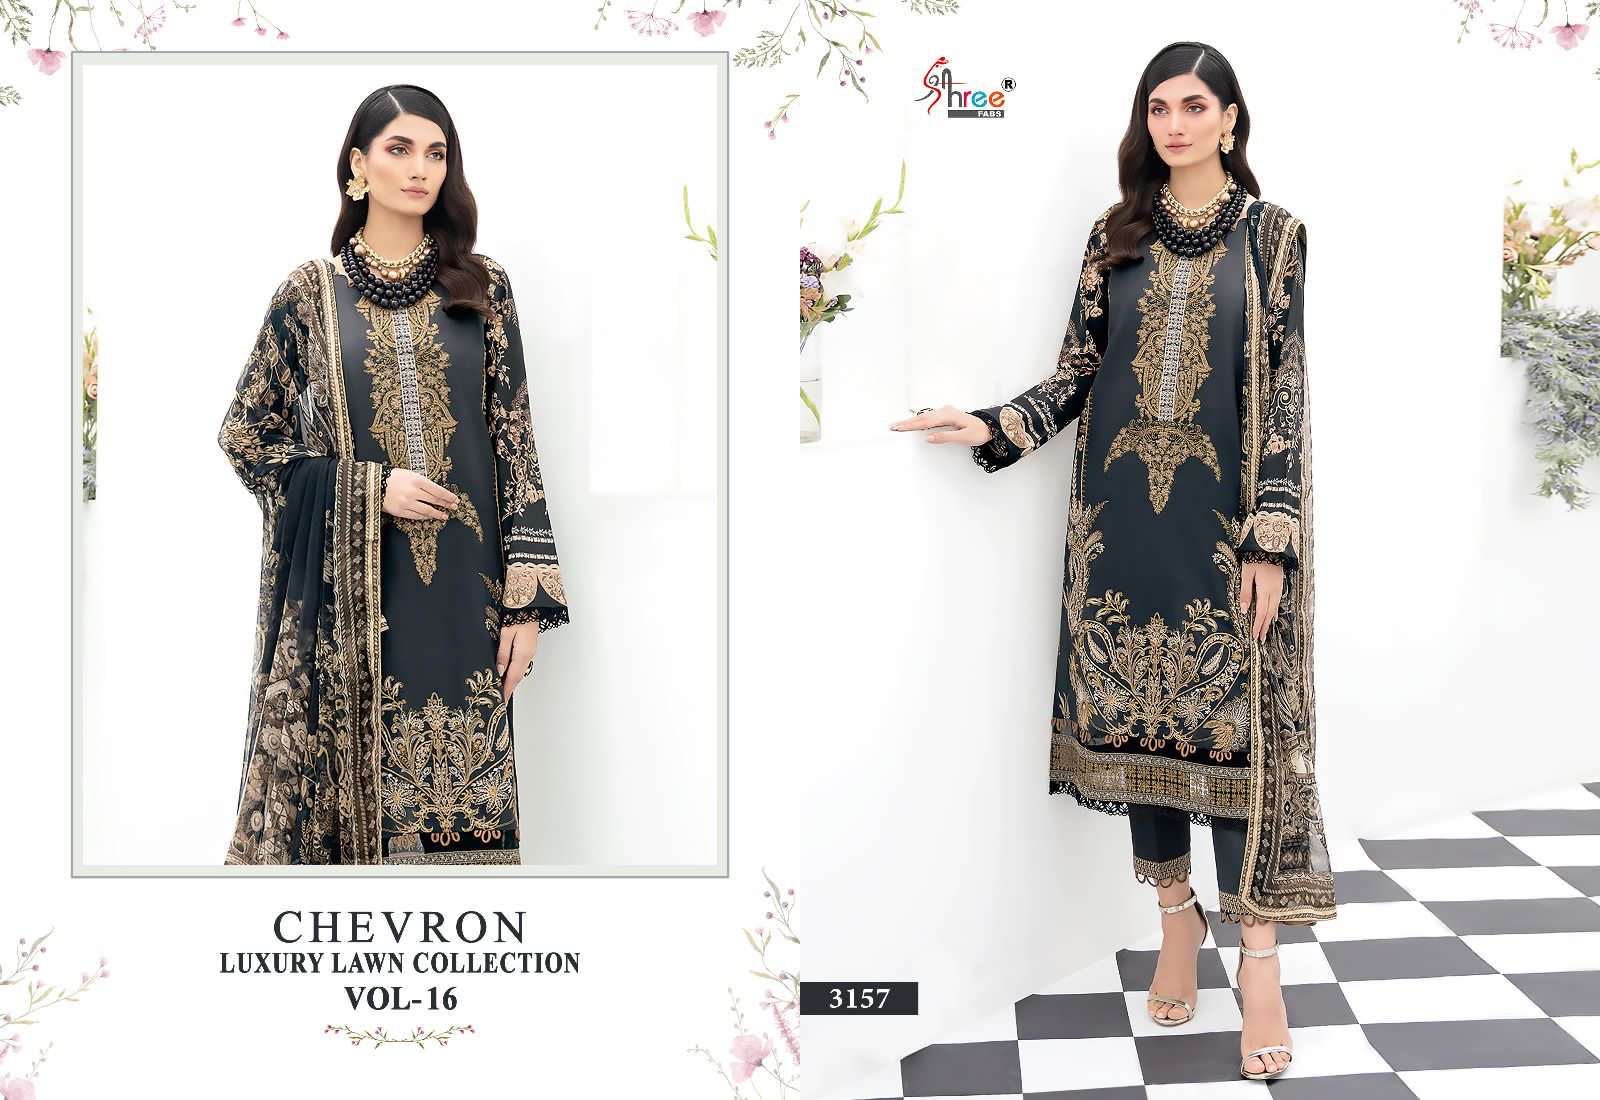 Shree Chevron Luxury Lawn Collection Vol 16 collection 2